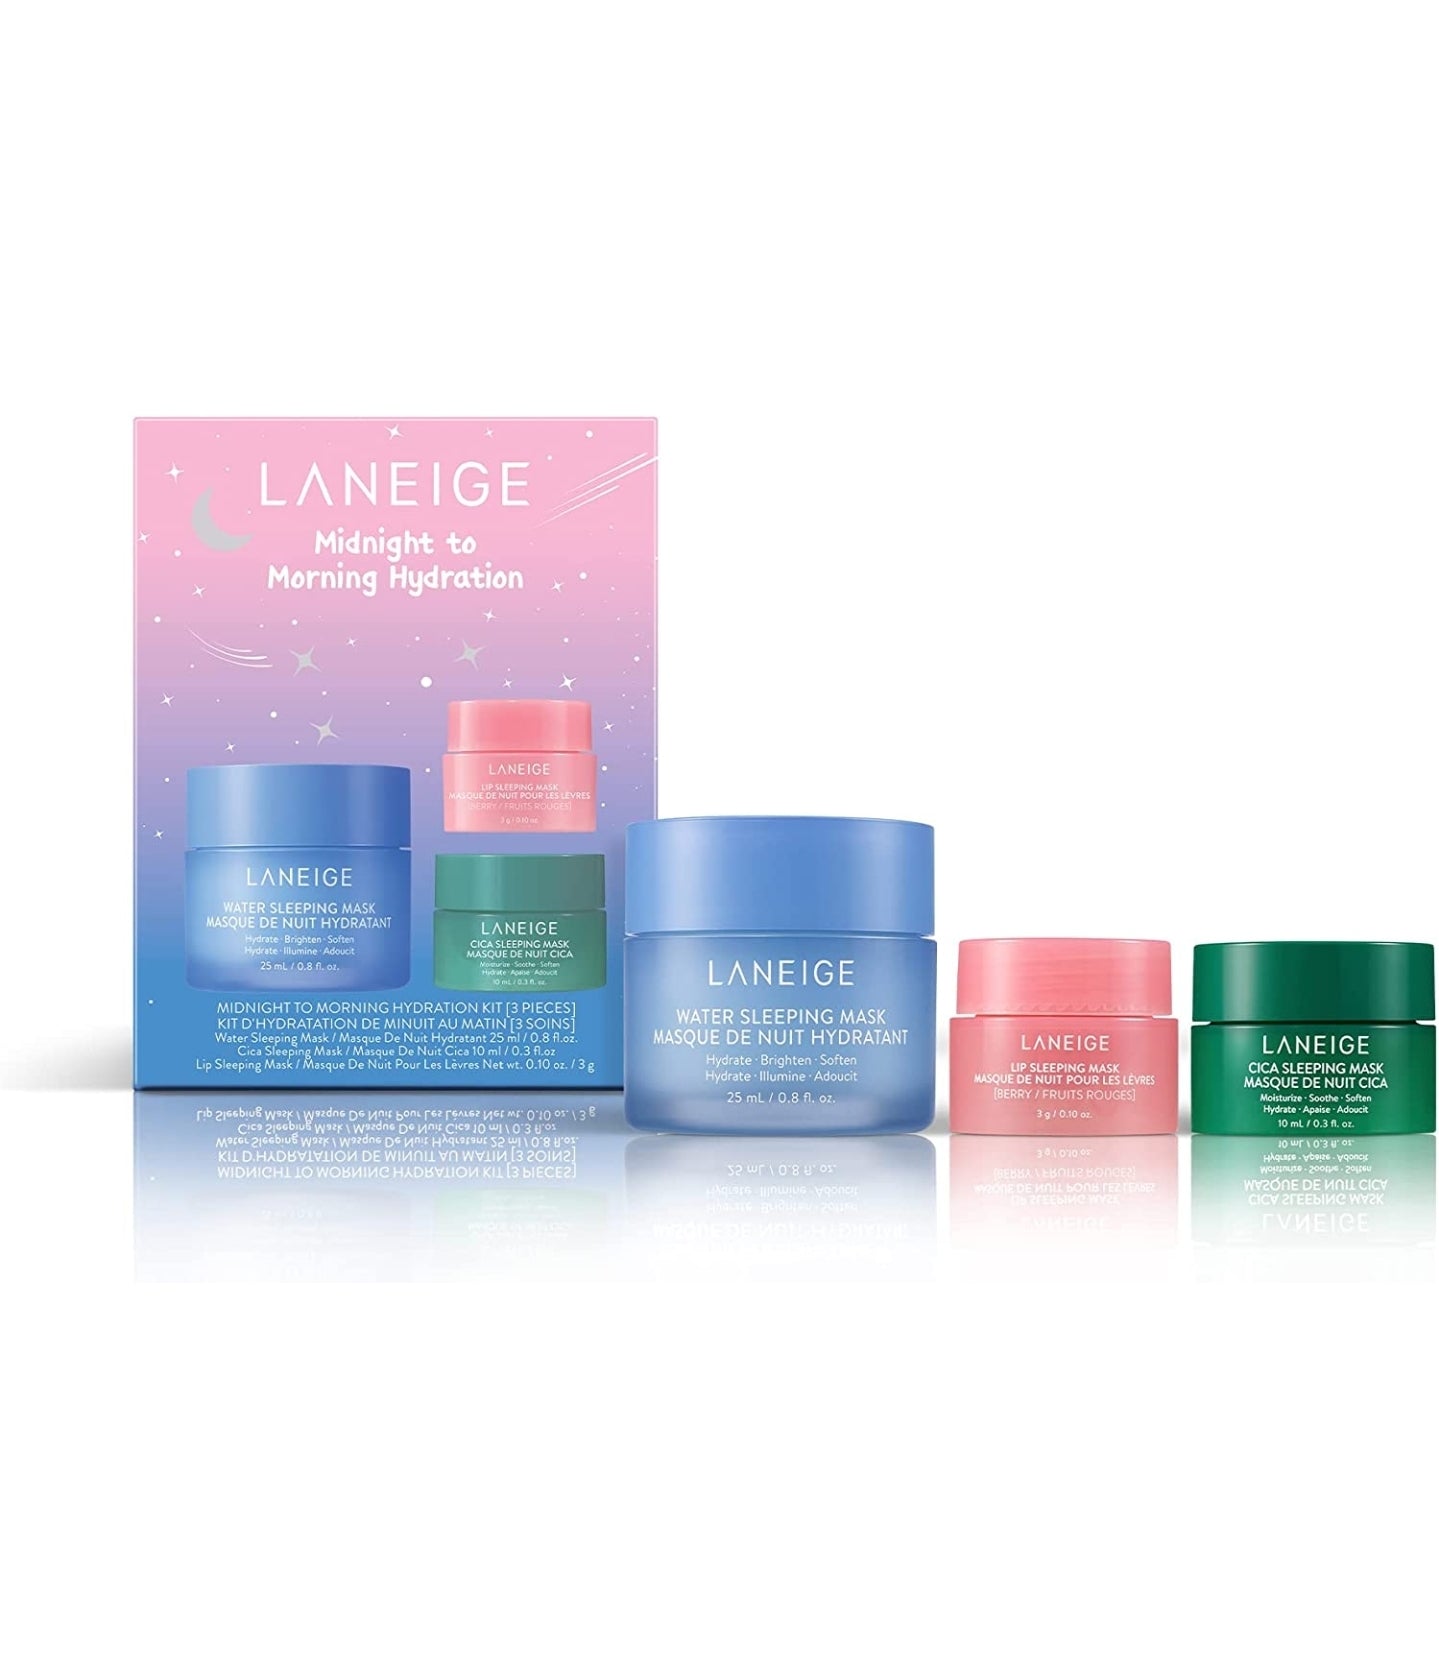 LANEIGE Water Sleeping Mask: Visibly Brighten, Boost Hydration, Squalane, Sleep biome